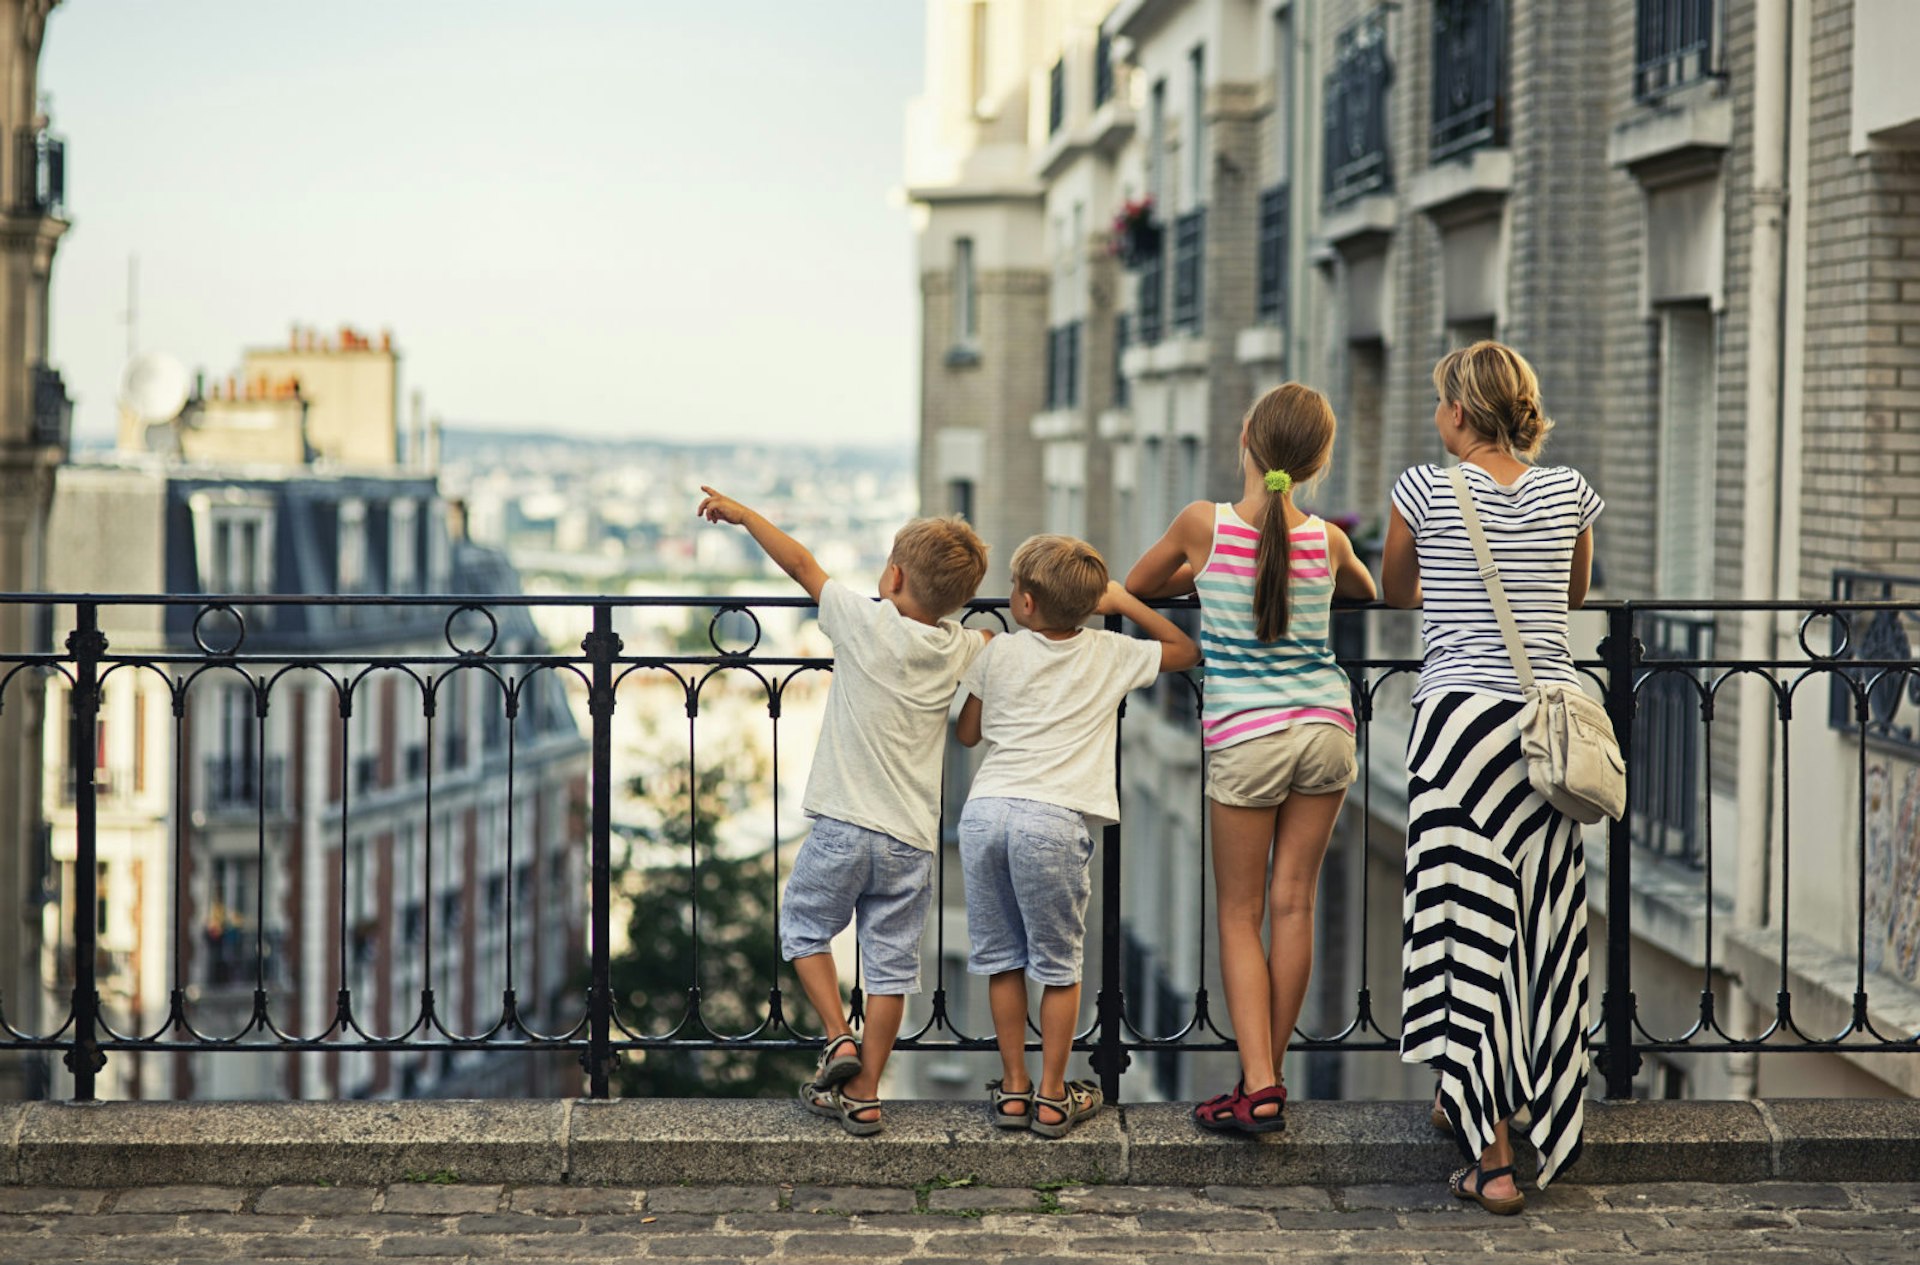 Cheaper flights mean today's kids may enjoy more city trips © Imgorthand / Getty Images